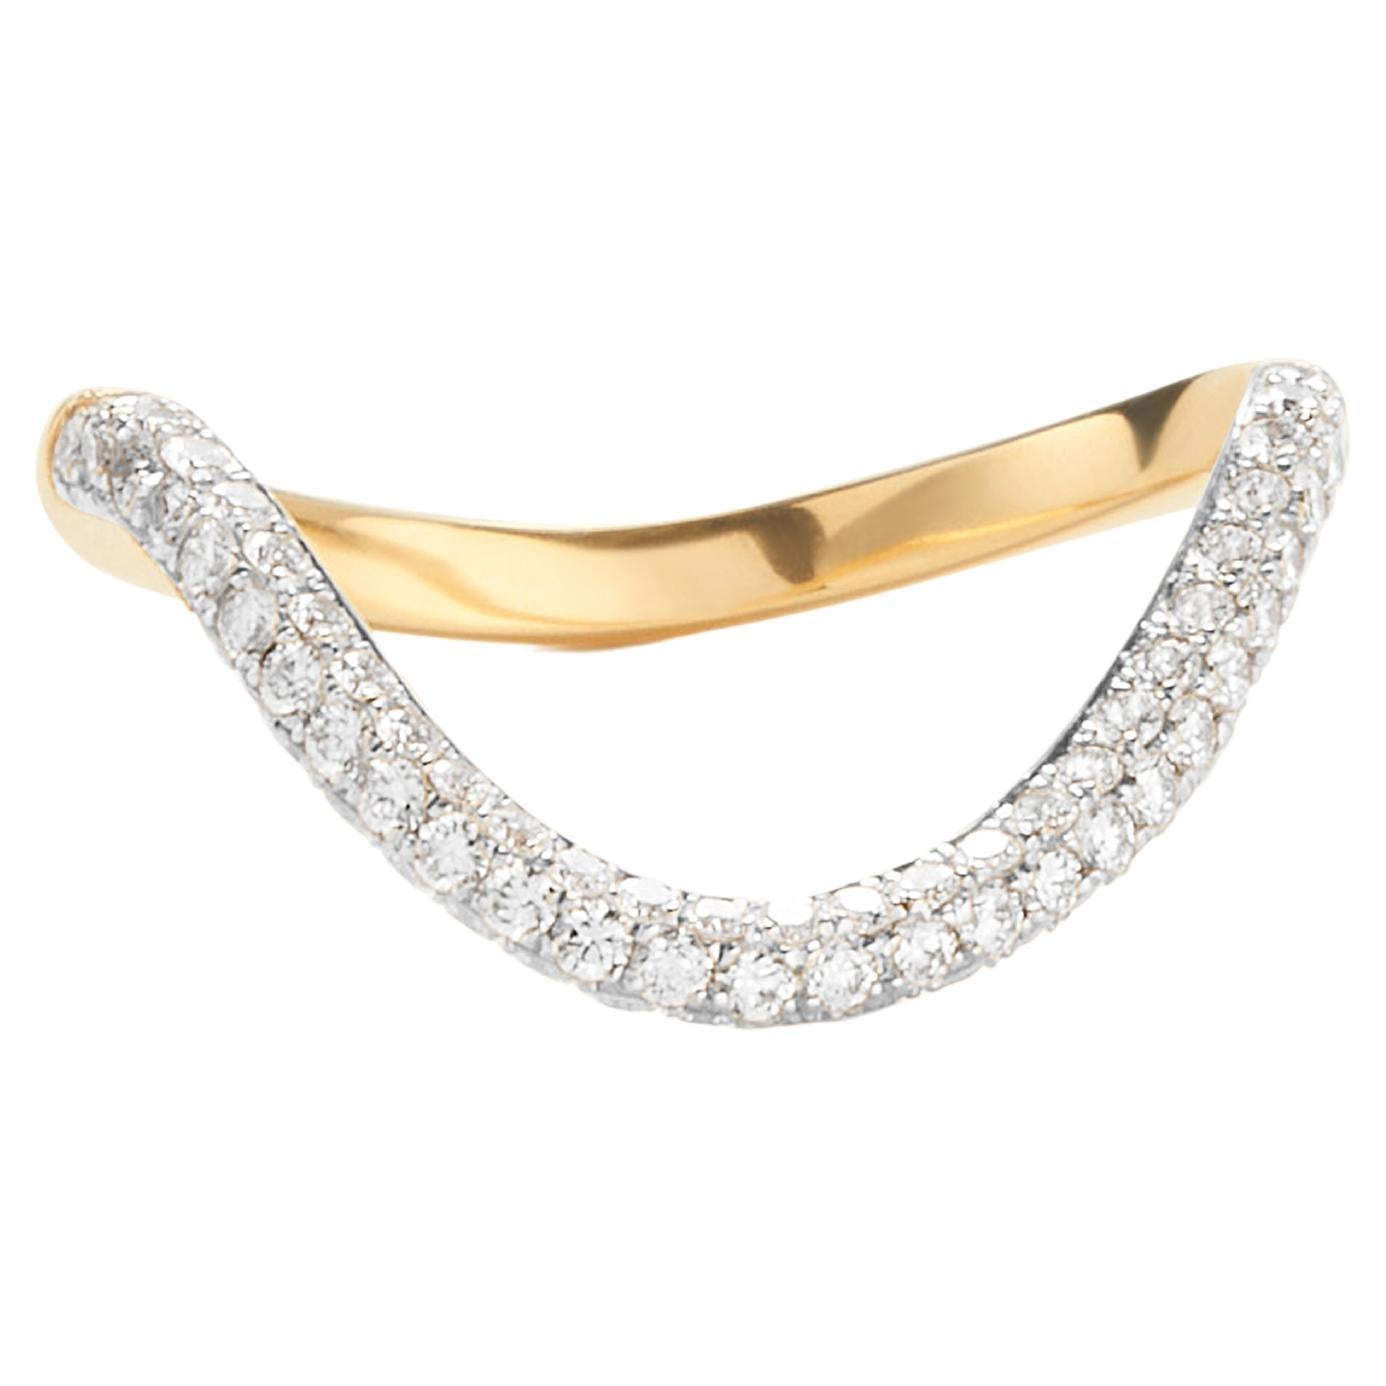 For Sale:  Rosario Navia Mara Medium Curved Ring II in 18K Gold and Diamonds